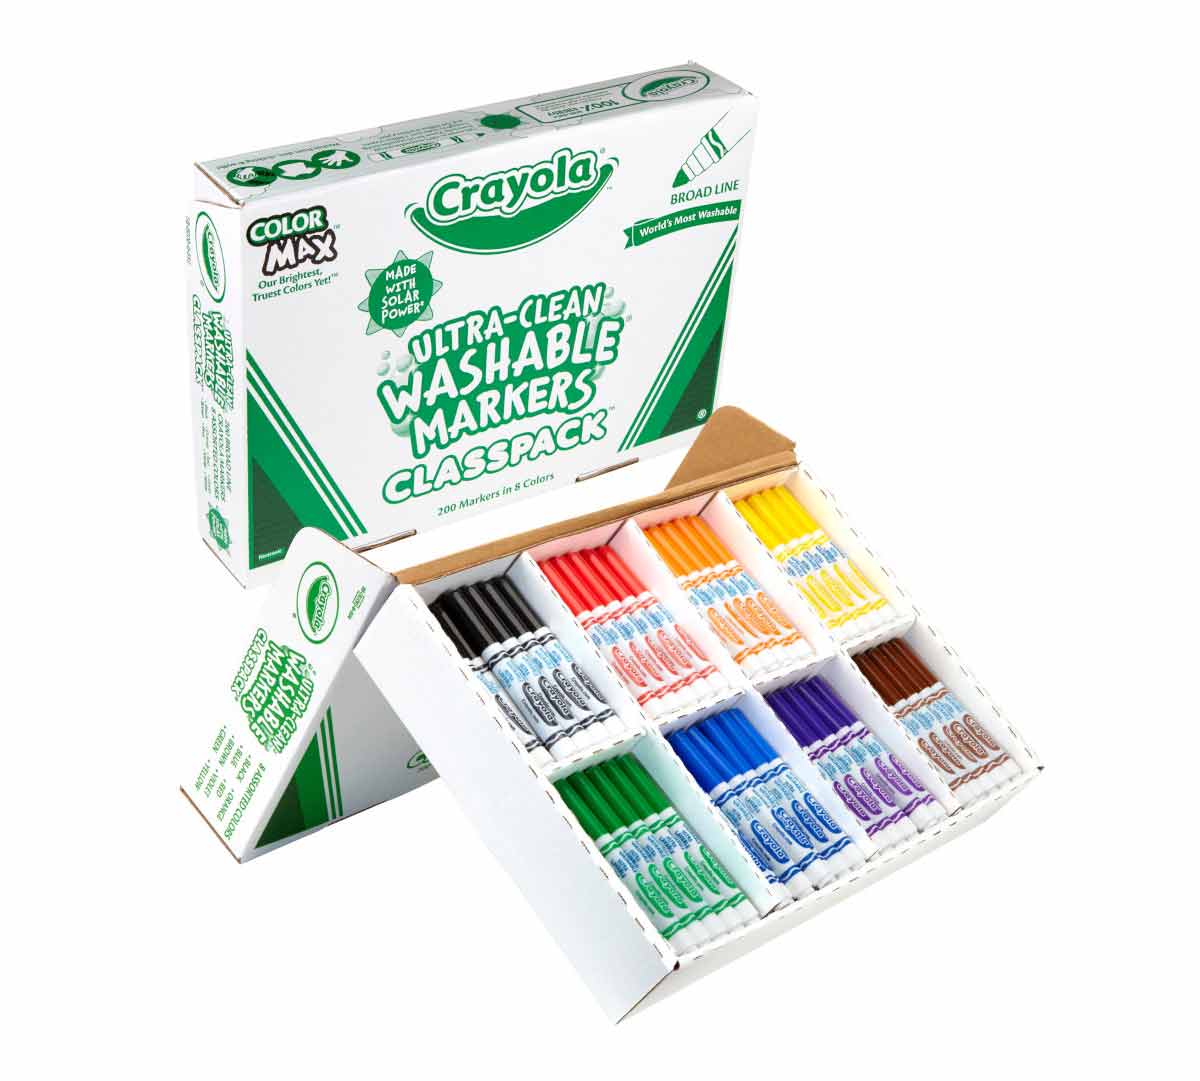 Ultra-Clean Washable Broad Line Markers Classpack, 200 Count, Crayola.com